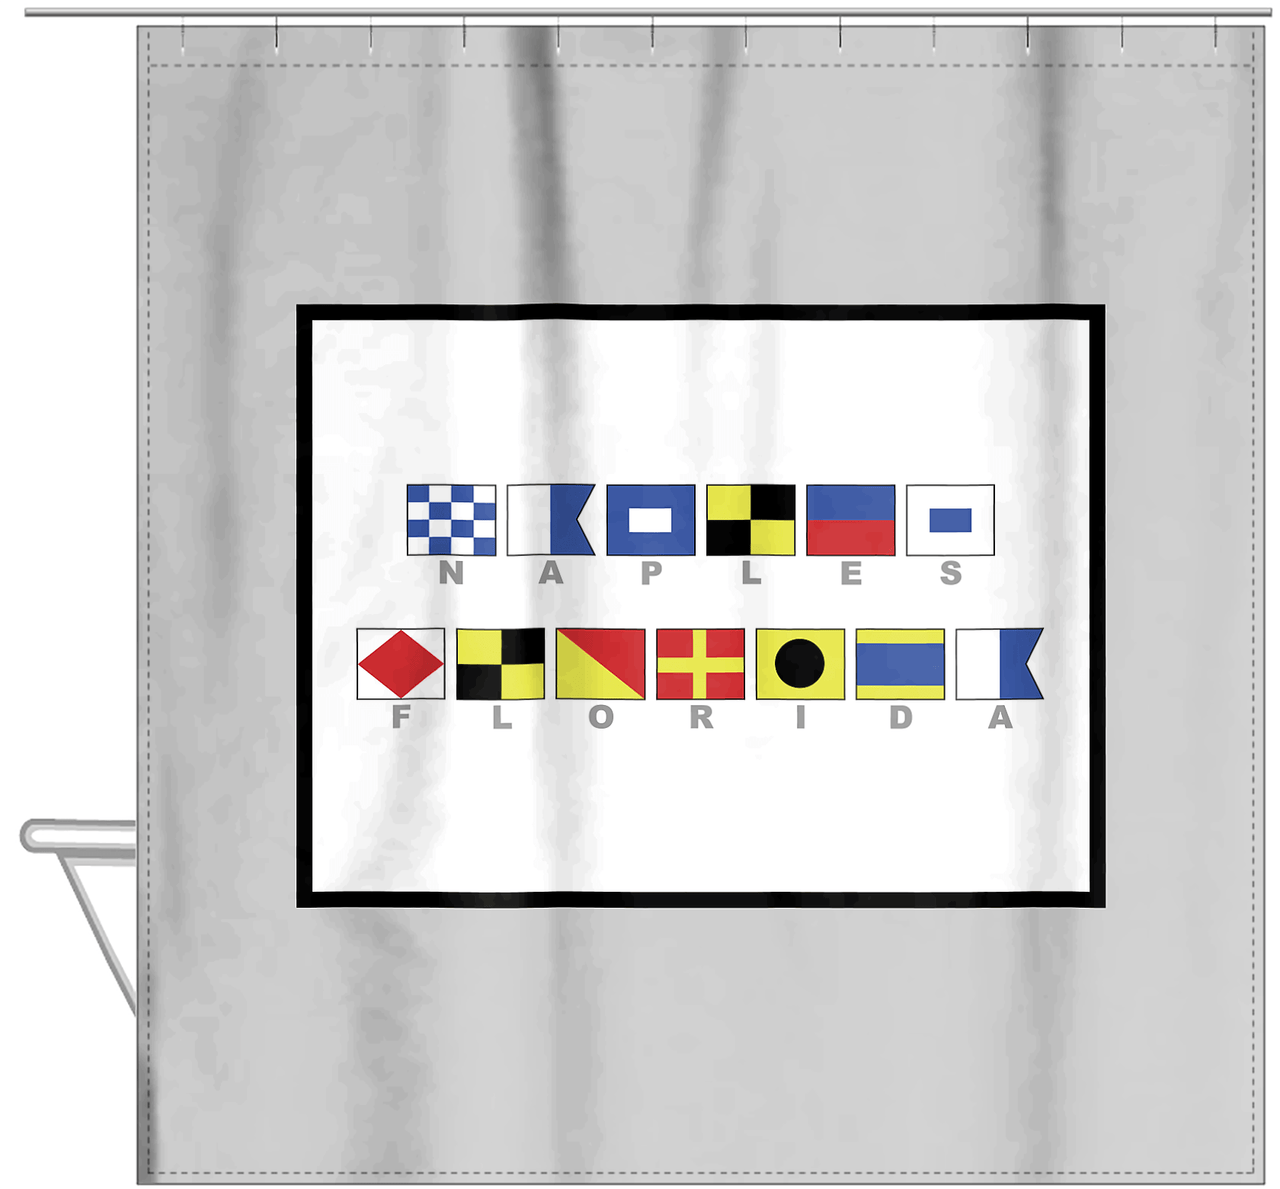 Personalized Nautical Flags Shower Curtain - Grey and Black - Flags With Grey Letters - Hanging View